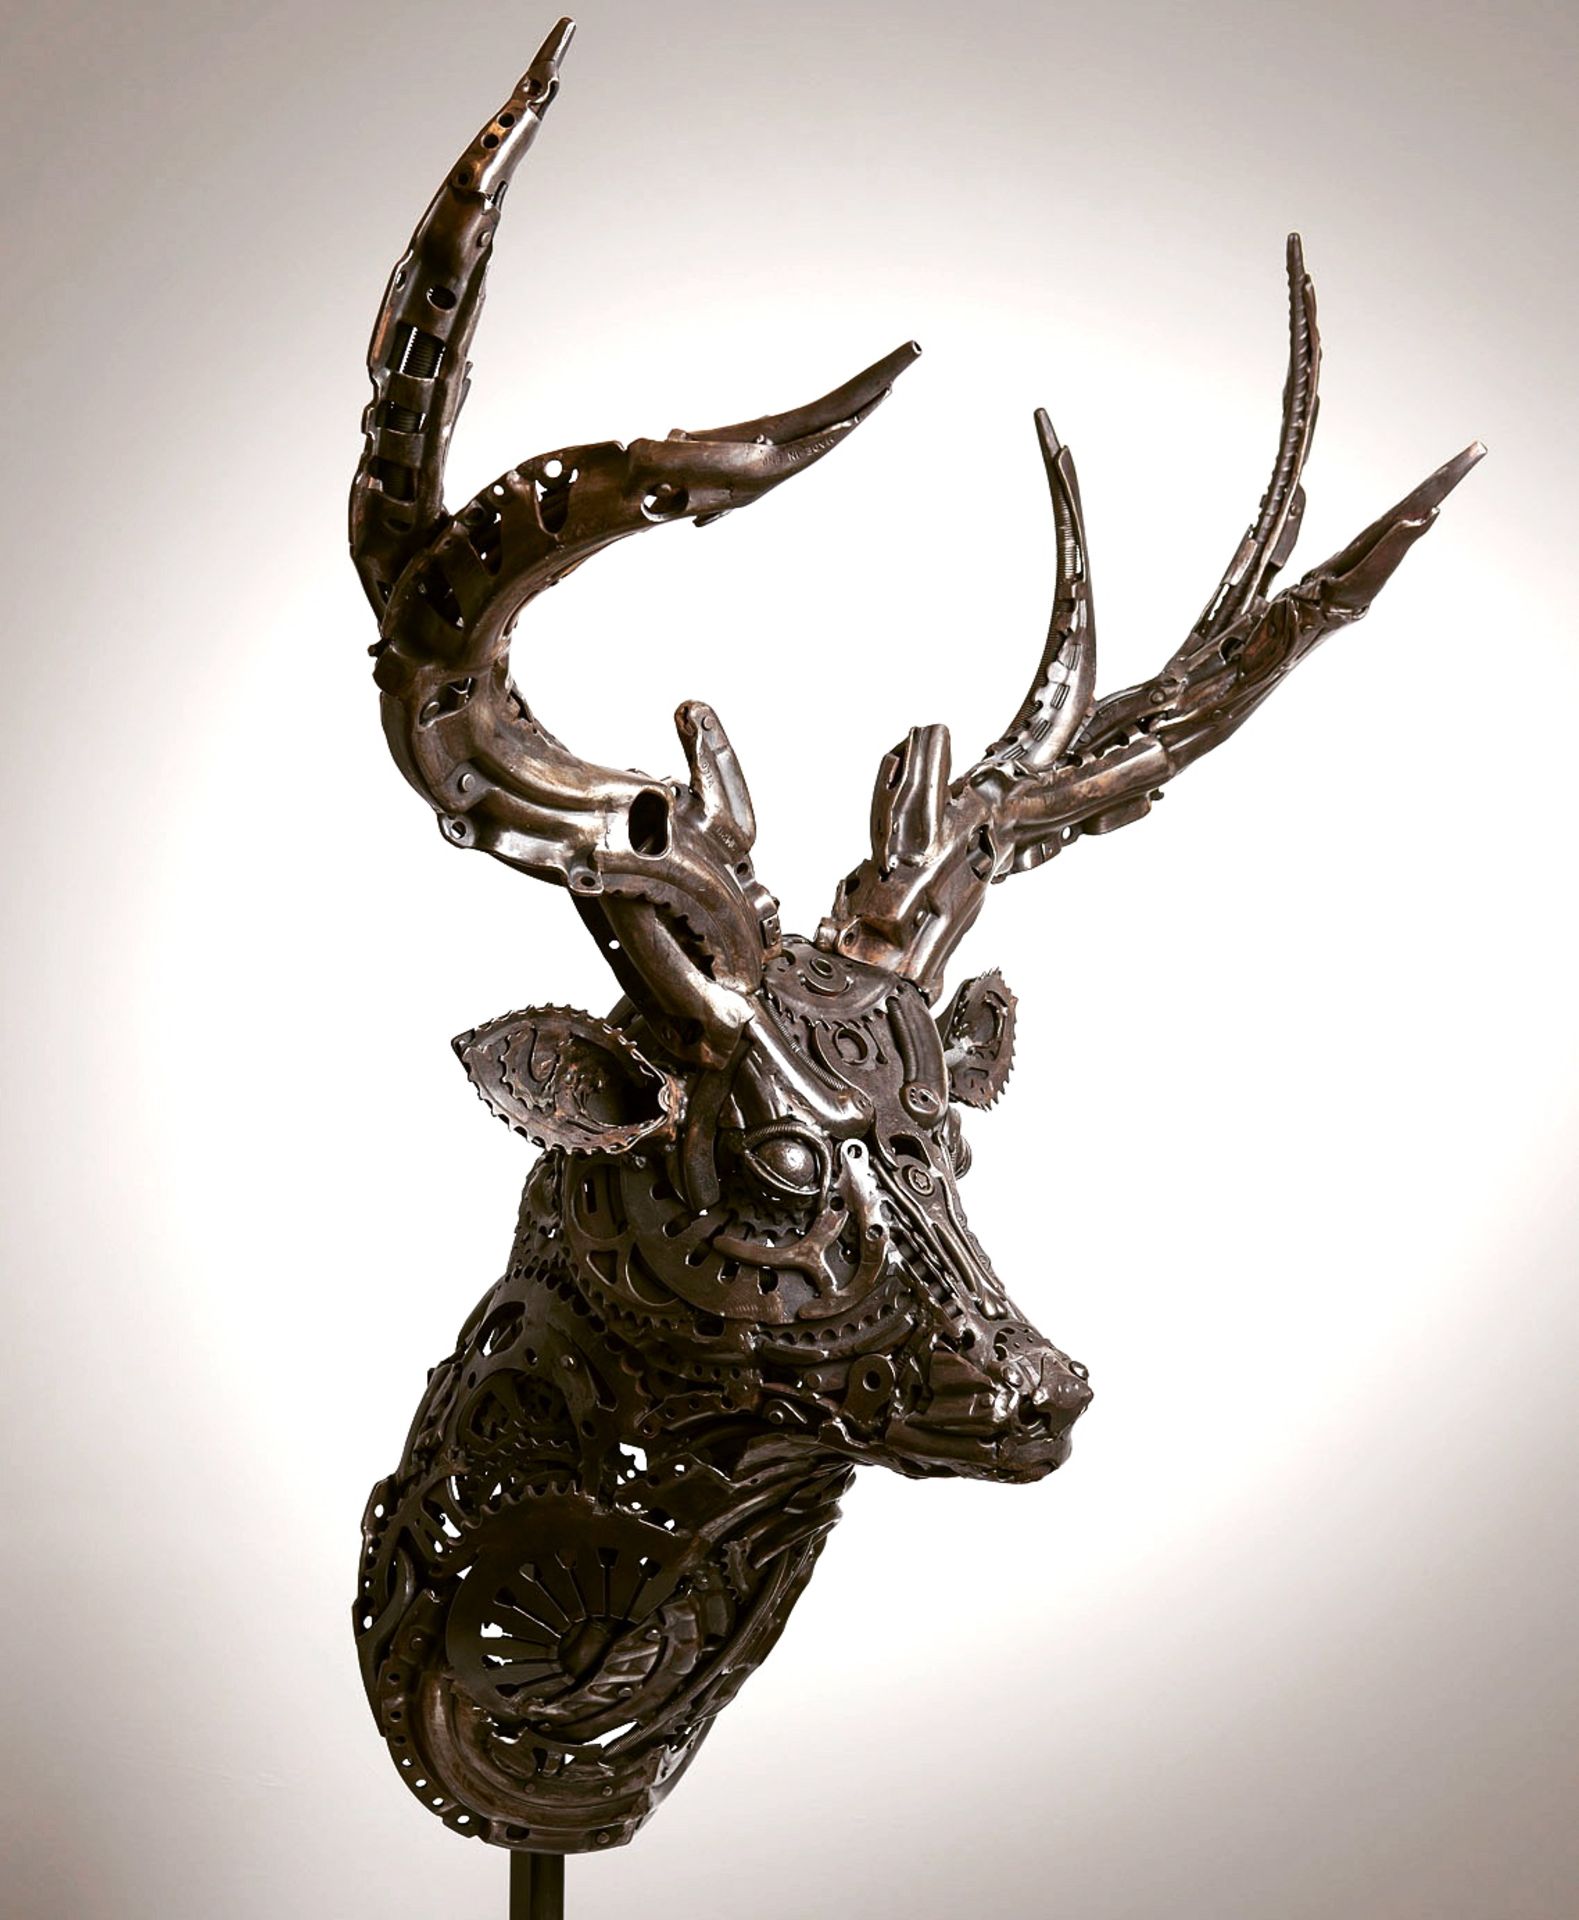 Artist: Alan Williams - Stag Bust (one off sculpture) - Image 2 of 2